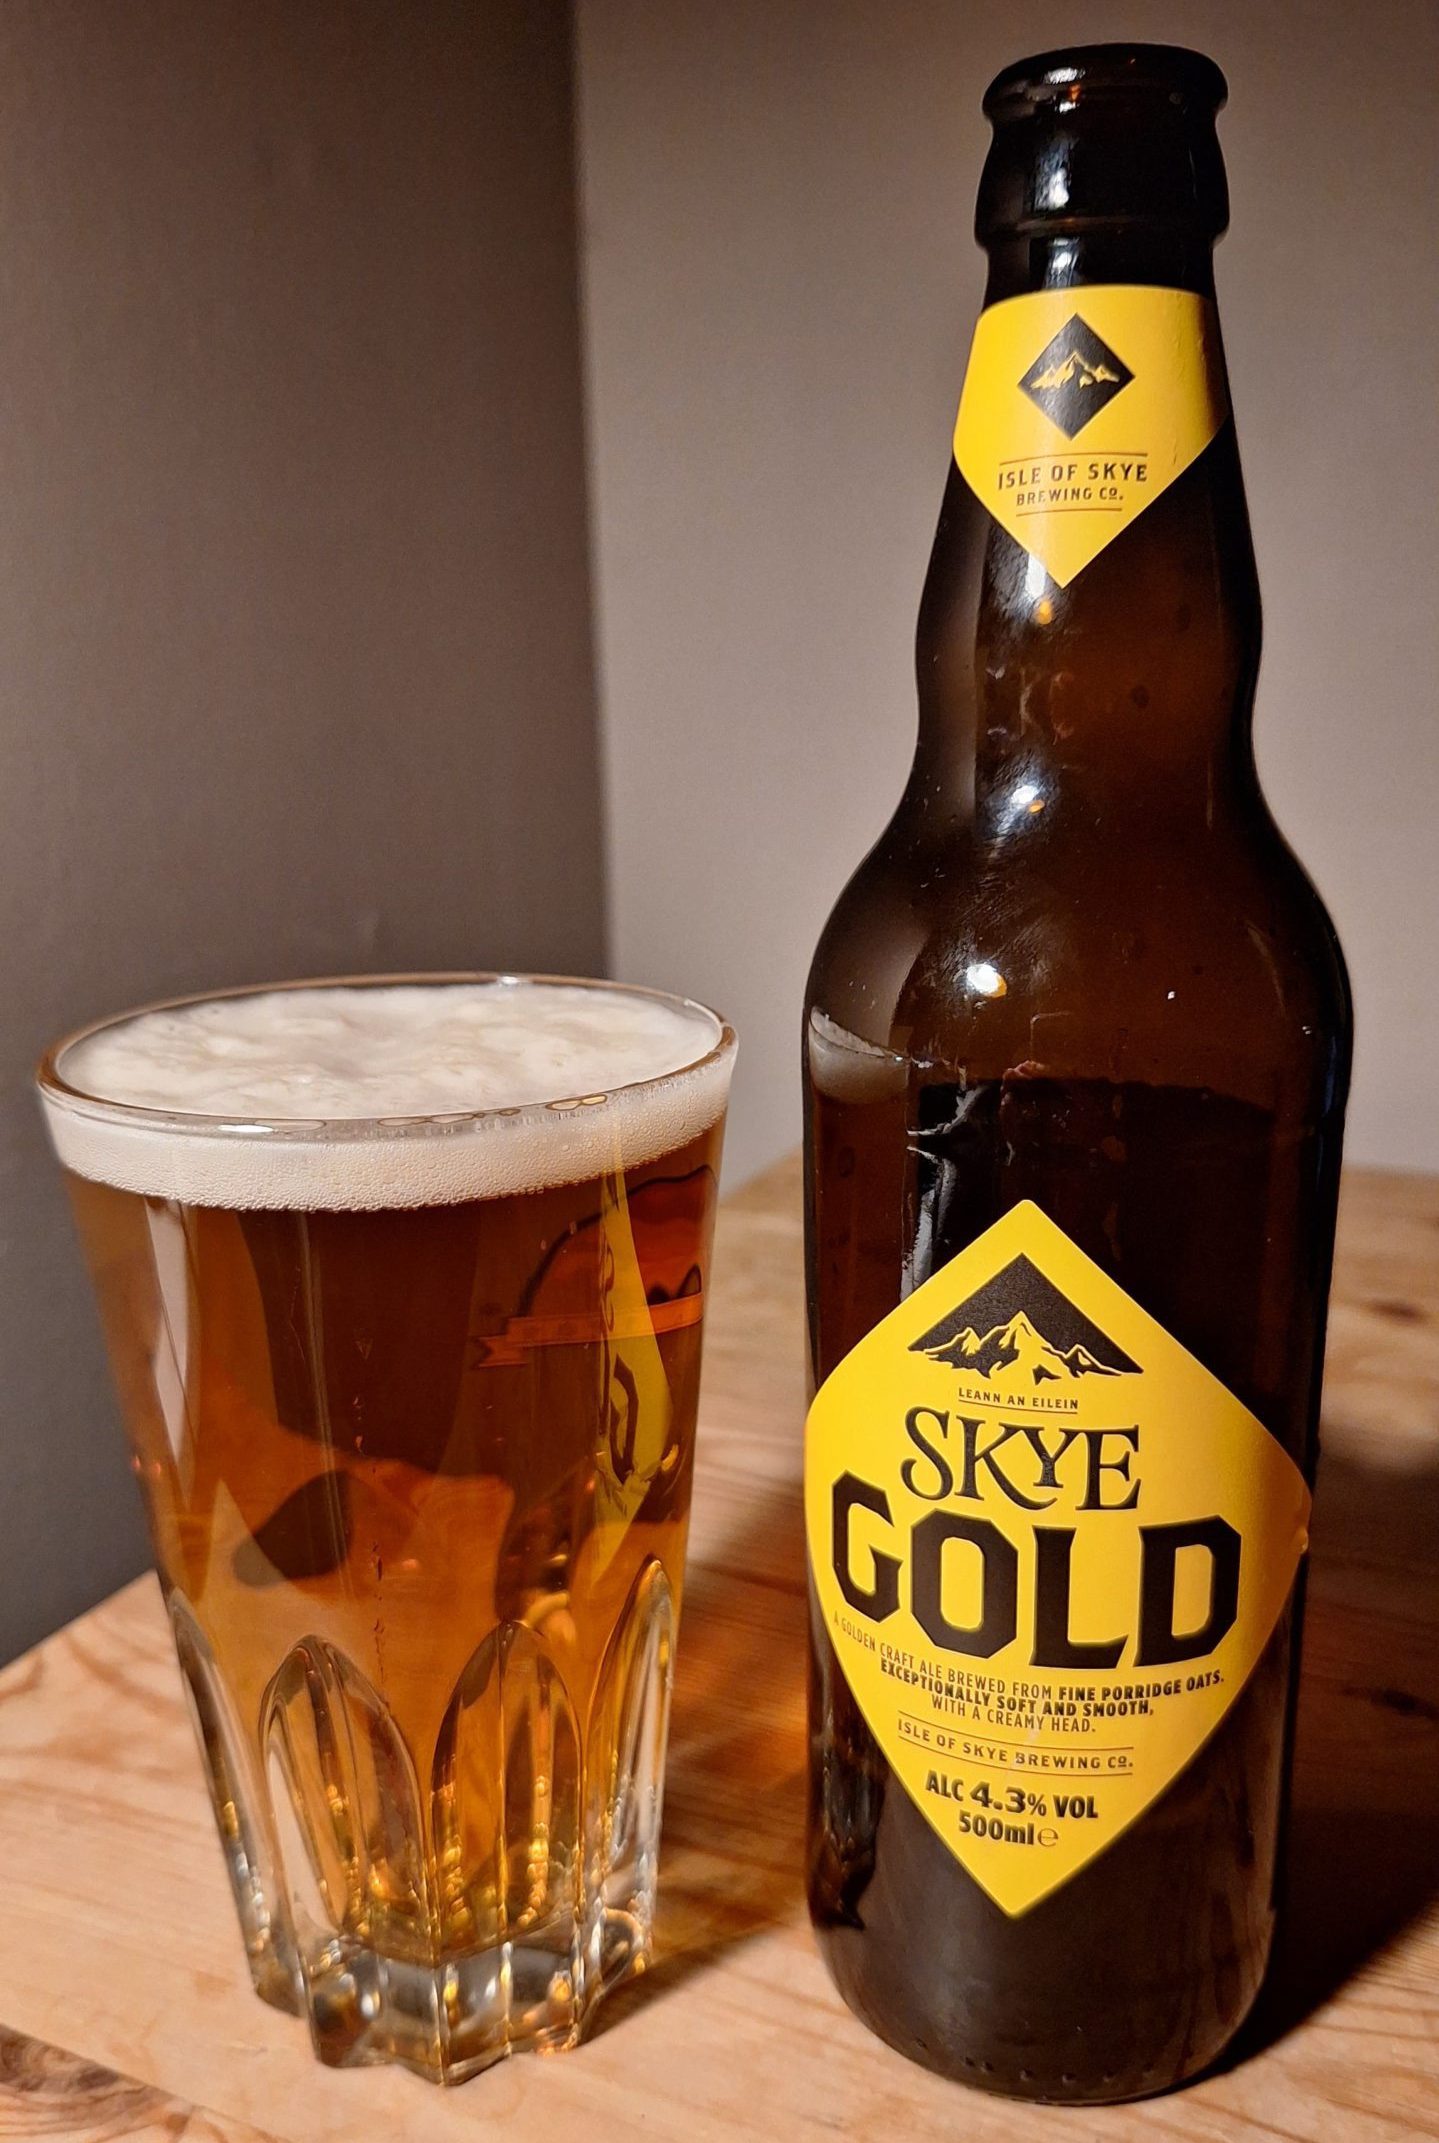 A bottle of Isle of Skye Brewing Company's Skye Gold, poured into a glass. 